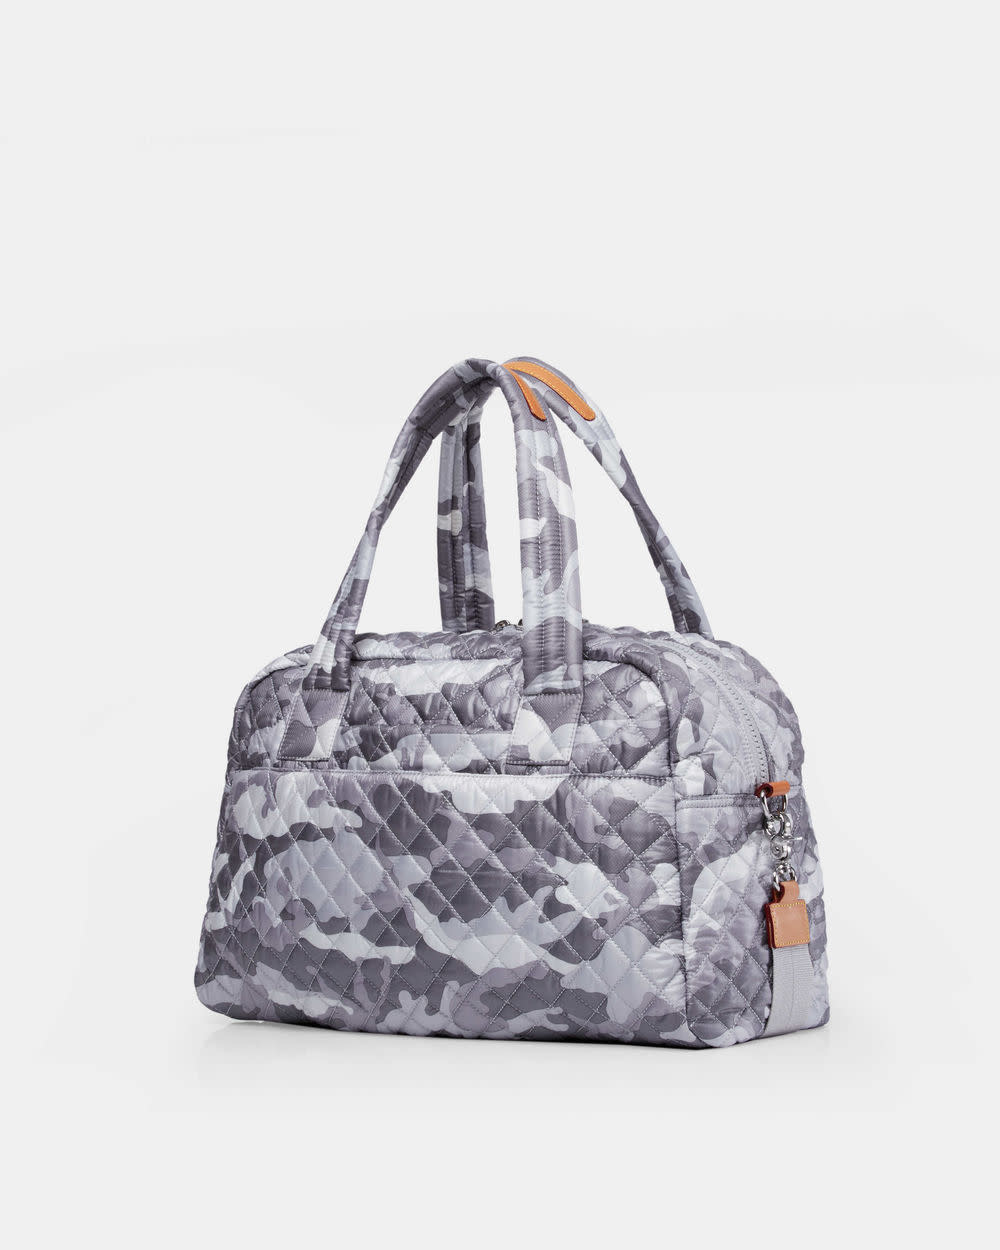 MZ WALLACE Jimmy Small Travel Bag, Light Gray Camo, 12001401 - Touch of  Class